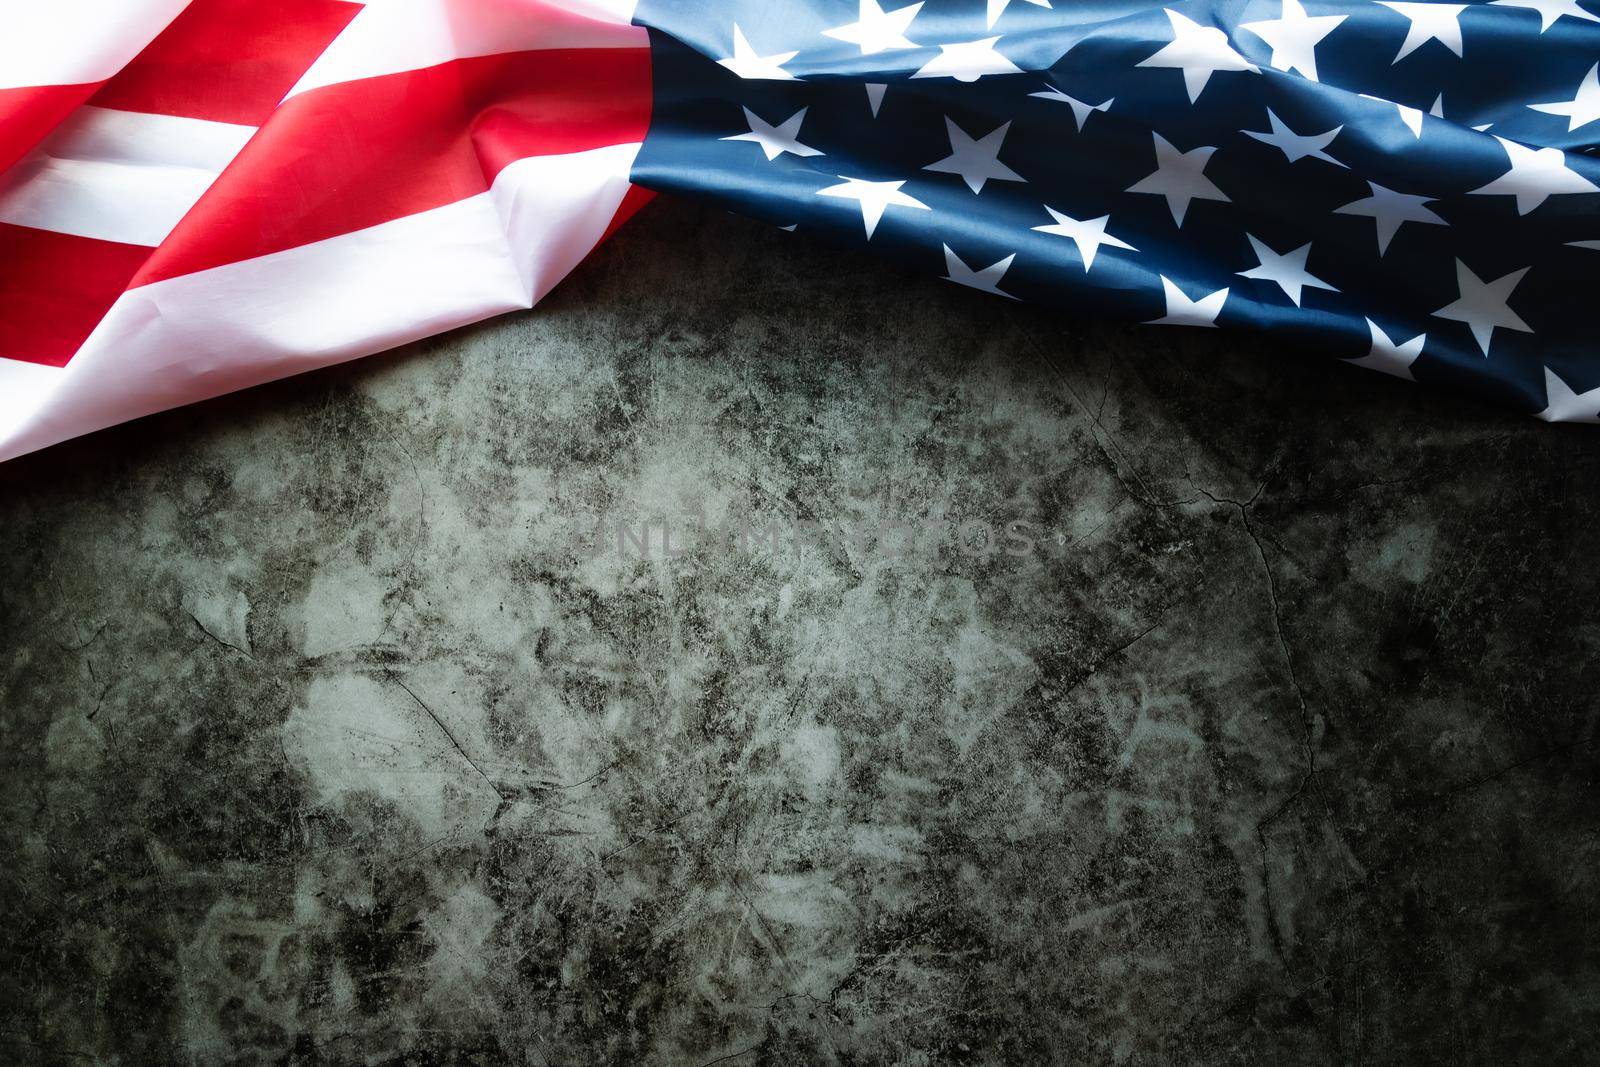 Martin Luther King Day Anniversary - American flag on abstract background by psodaz